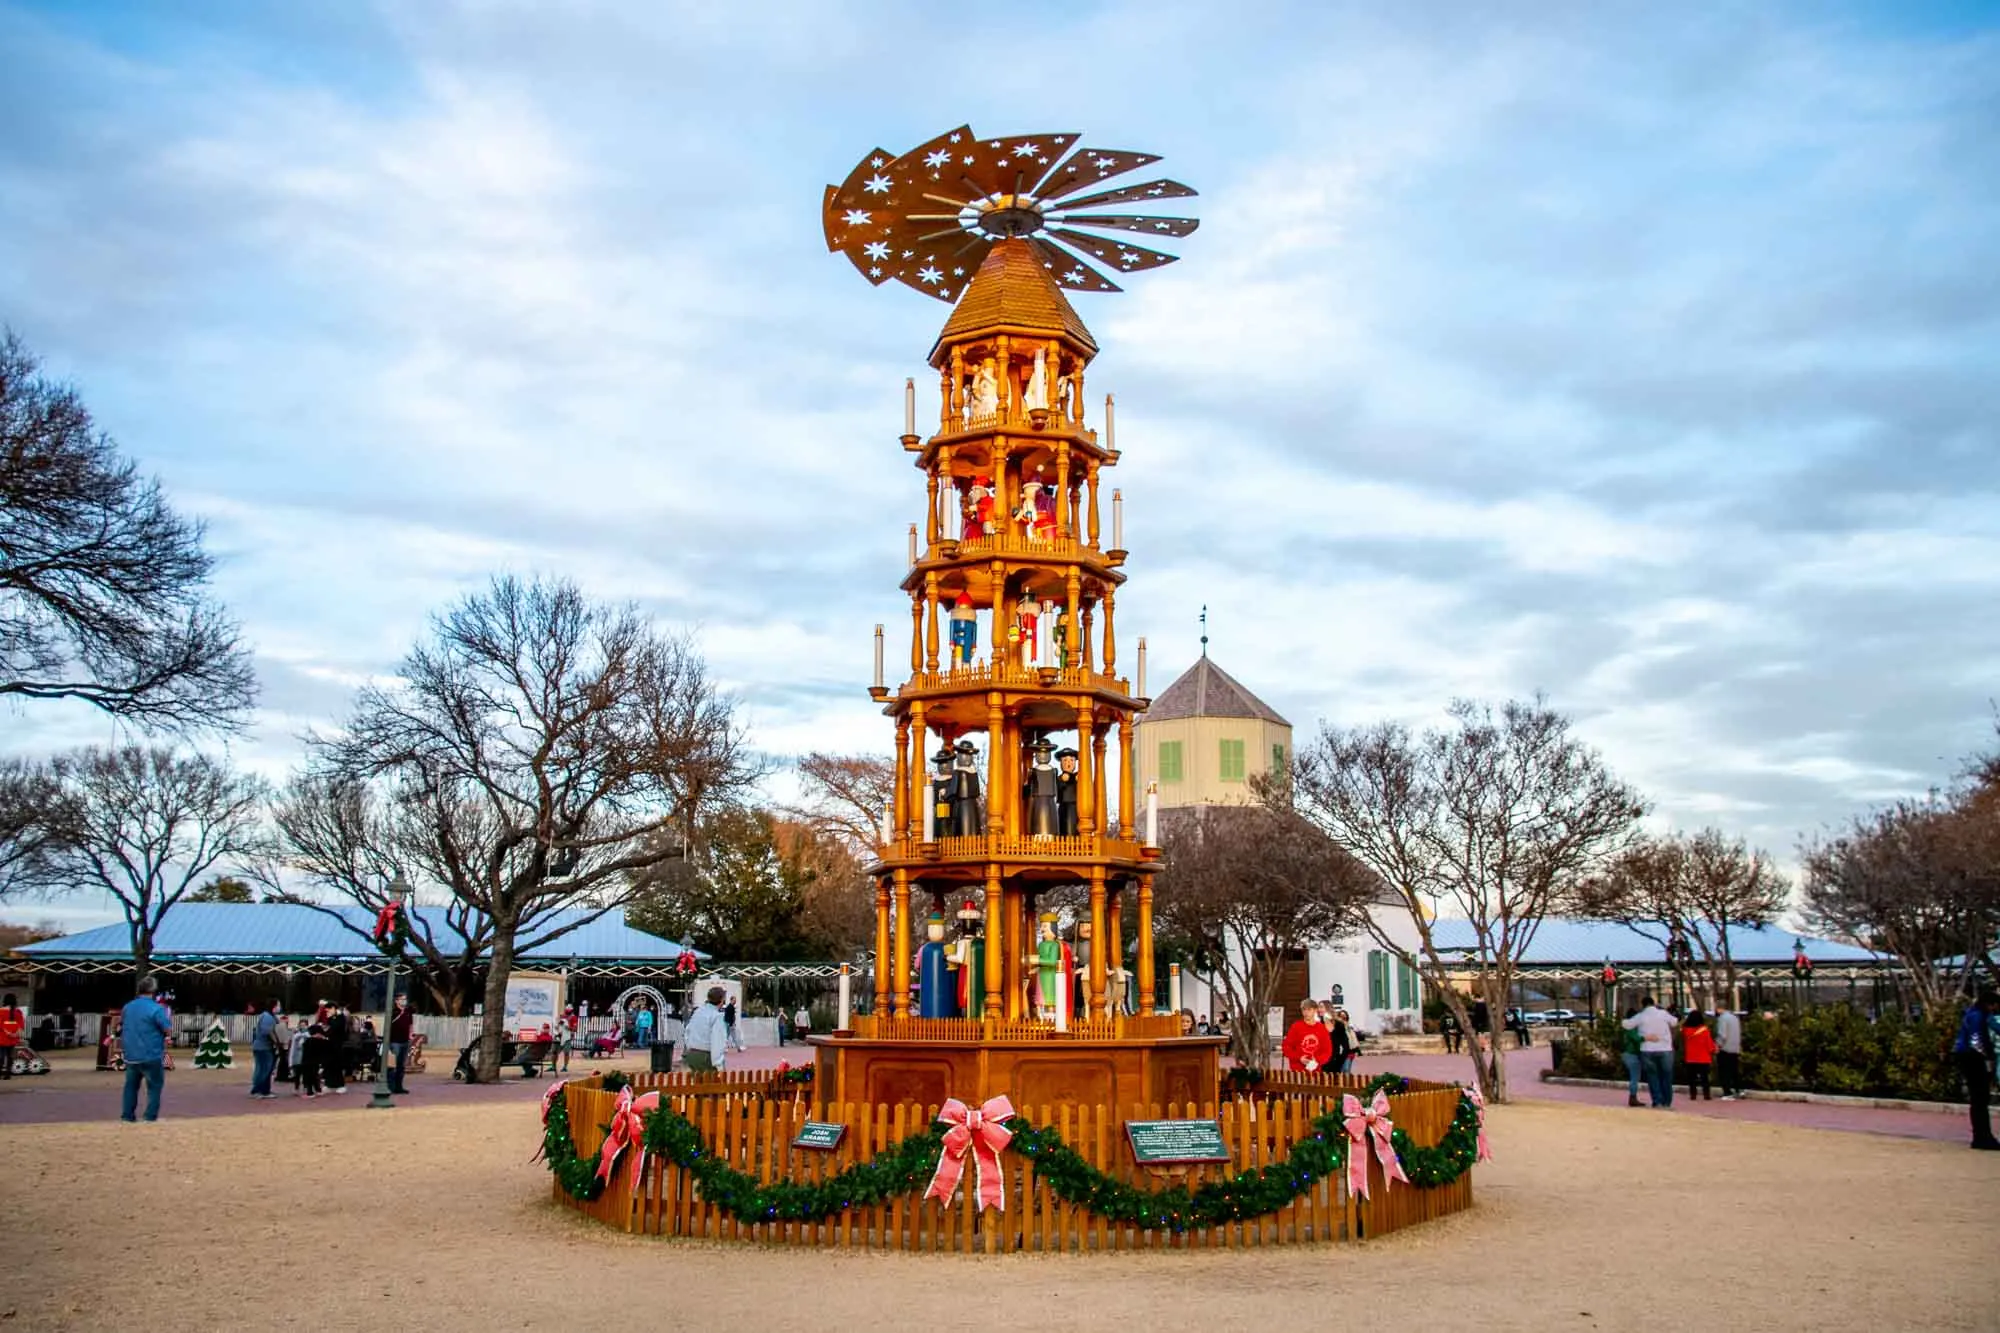 German Christmas pyramid with a propeller top in town square